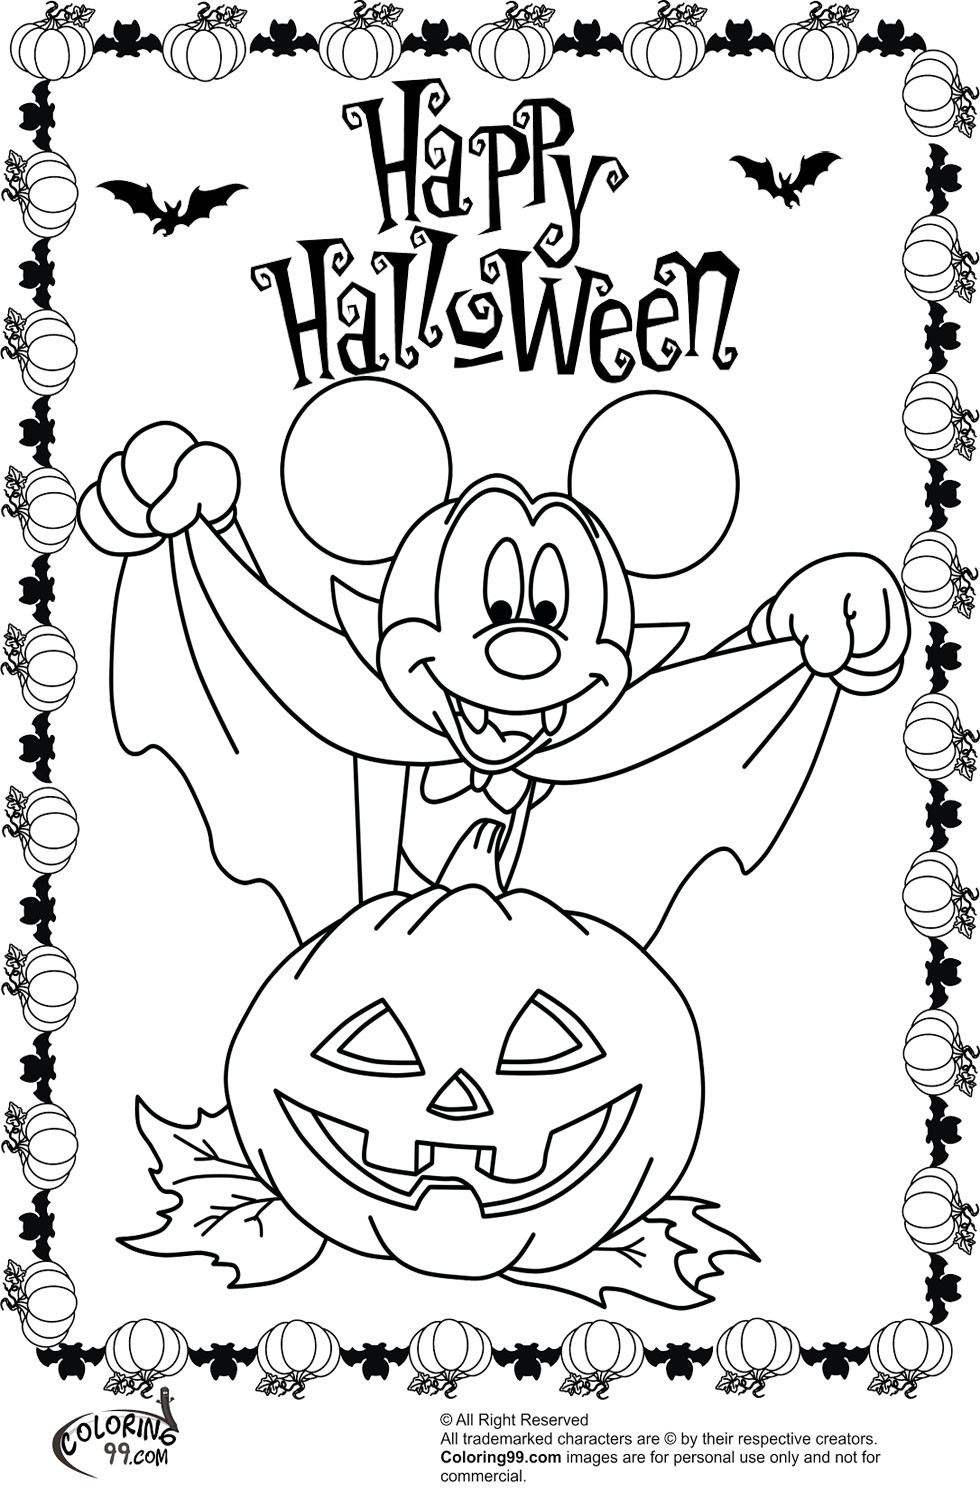 Halloween Printable Coloring Pages
 Minnie and Mickey Mouse Coloring Pages for Halloween